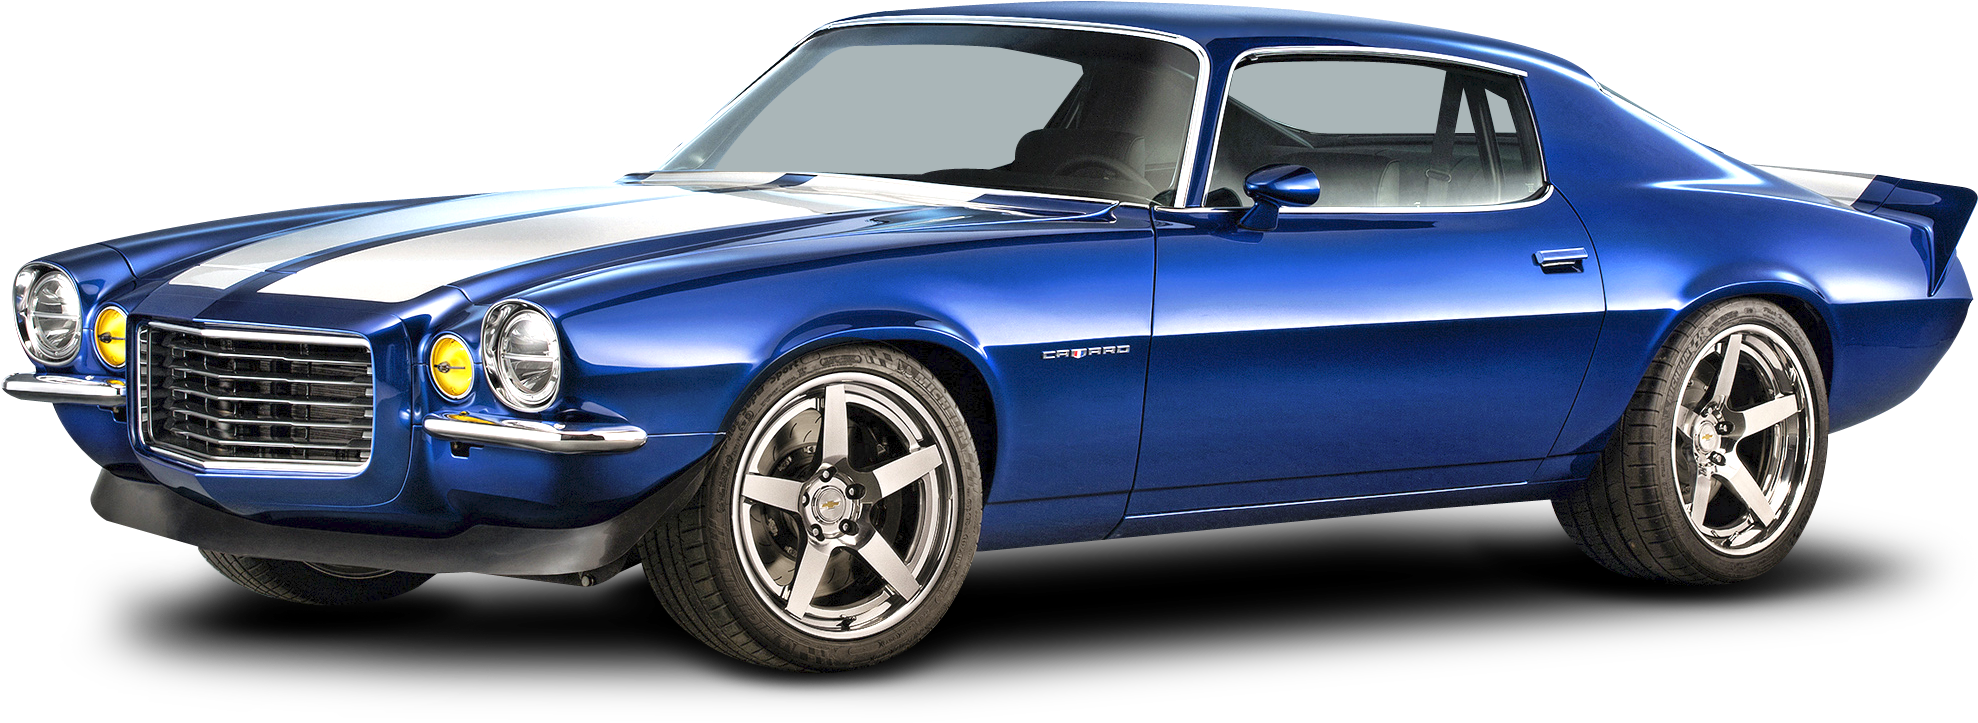 1970 Chevy Camaro, Hd Png Download